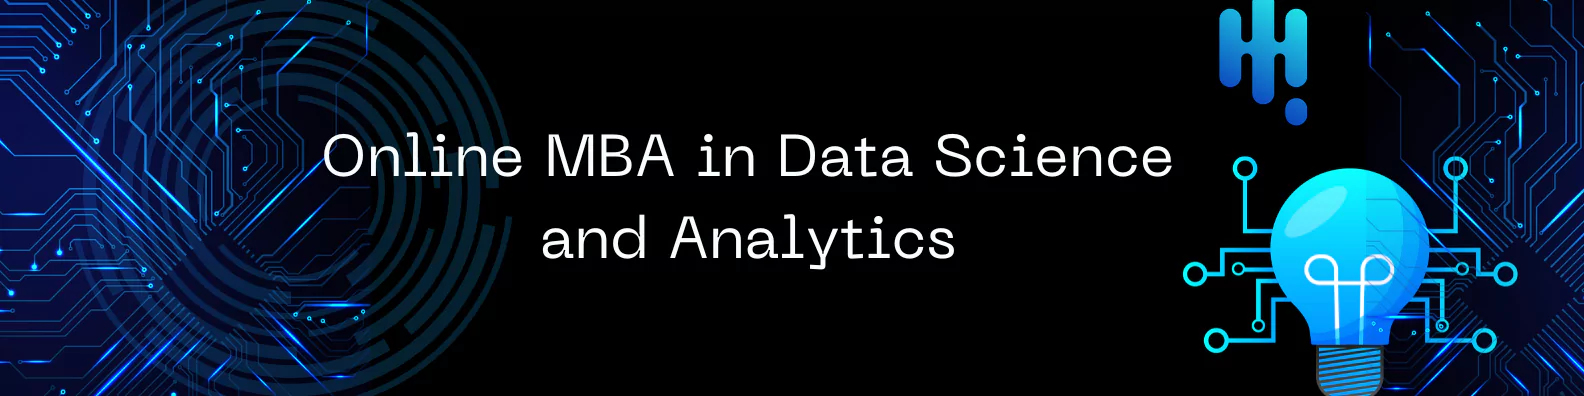 Online MBA in Data Science and Analytics